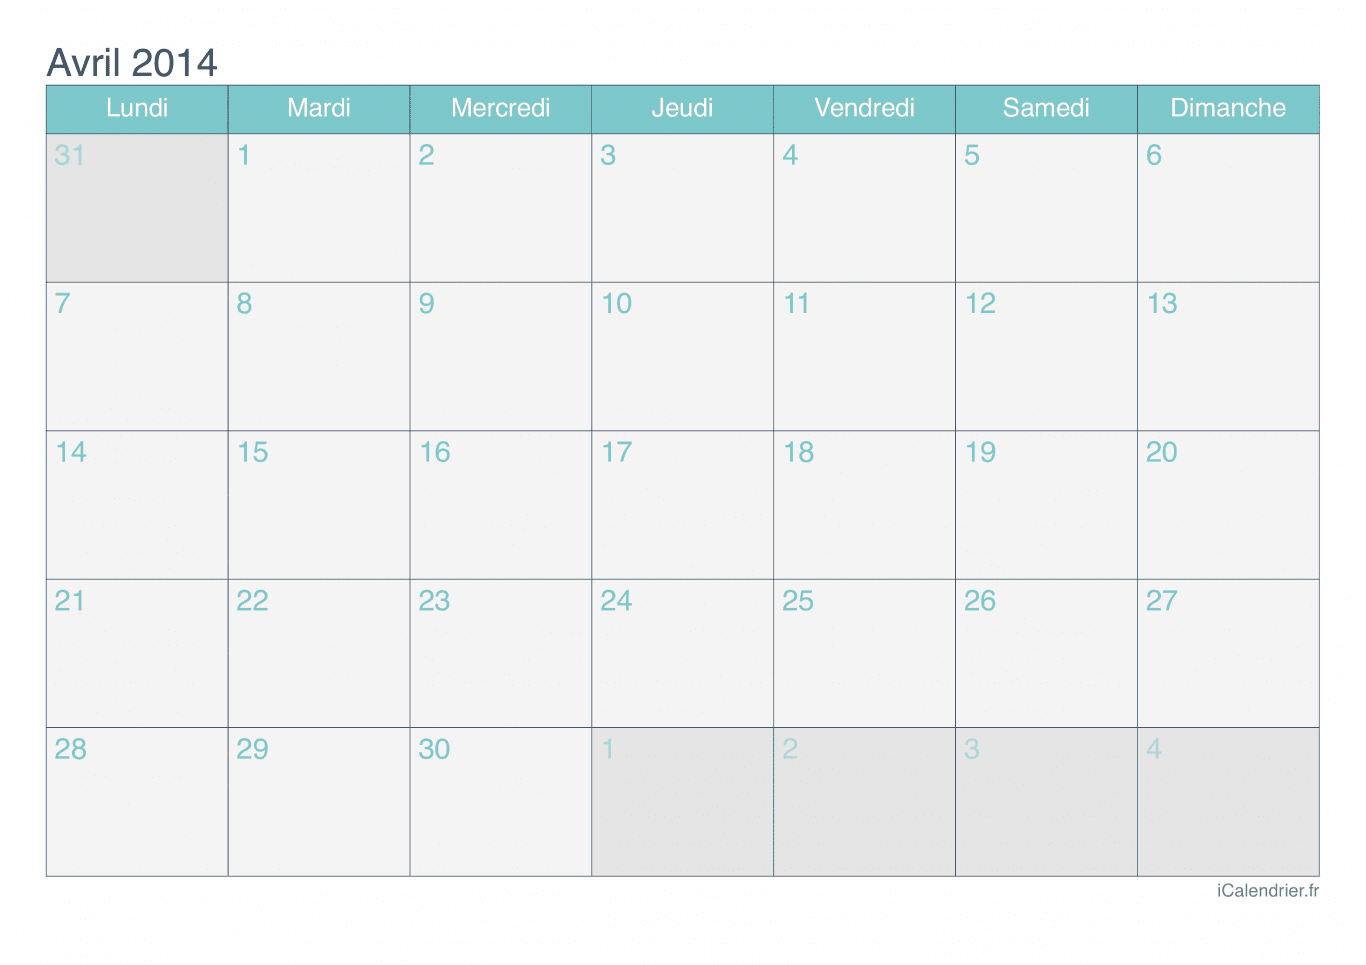 Calendrier d'avril 2014 - Turquoise